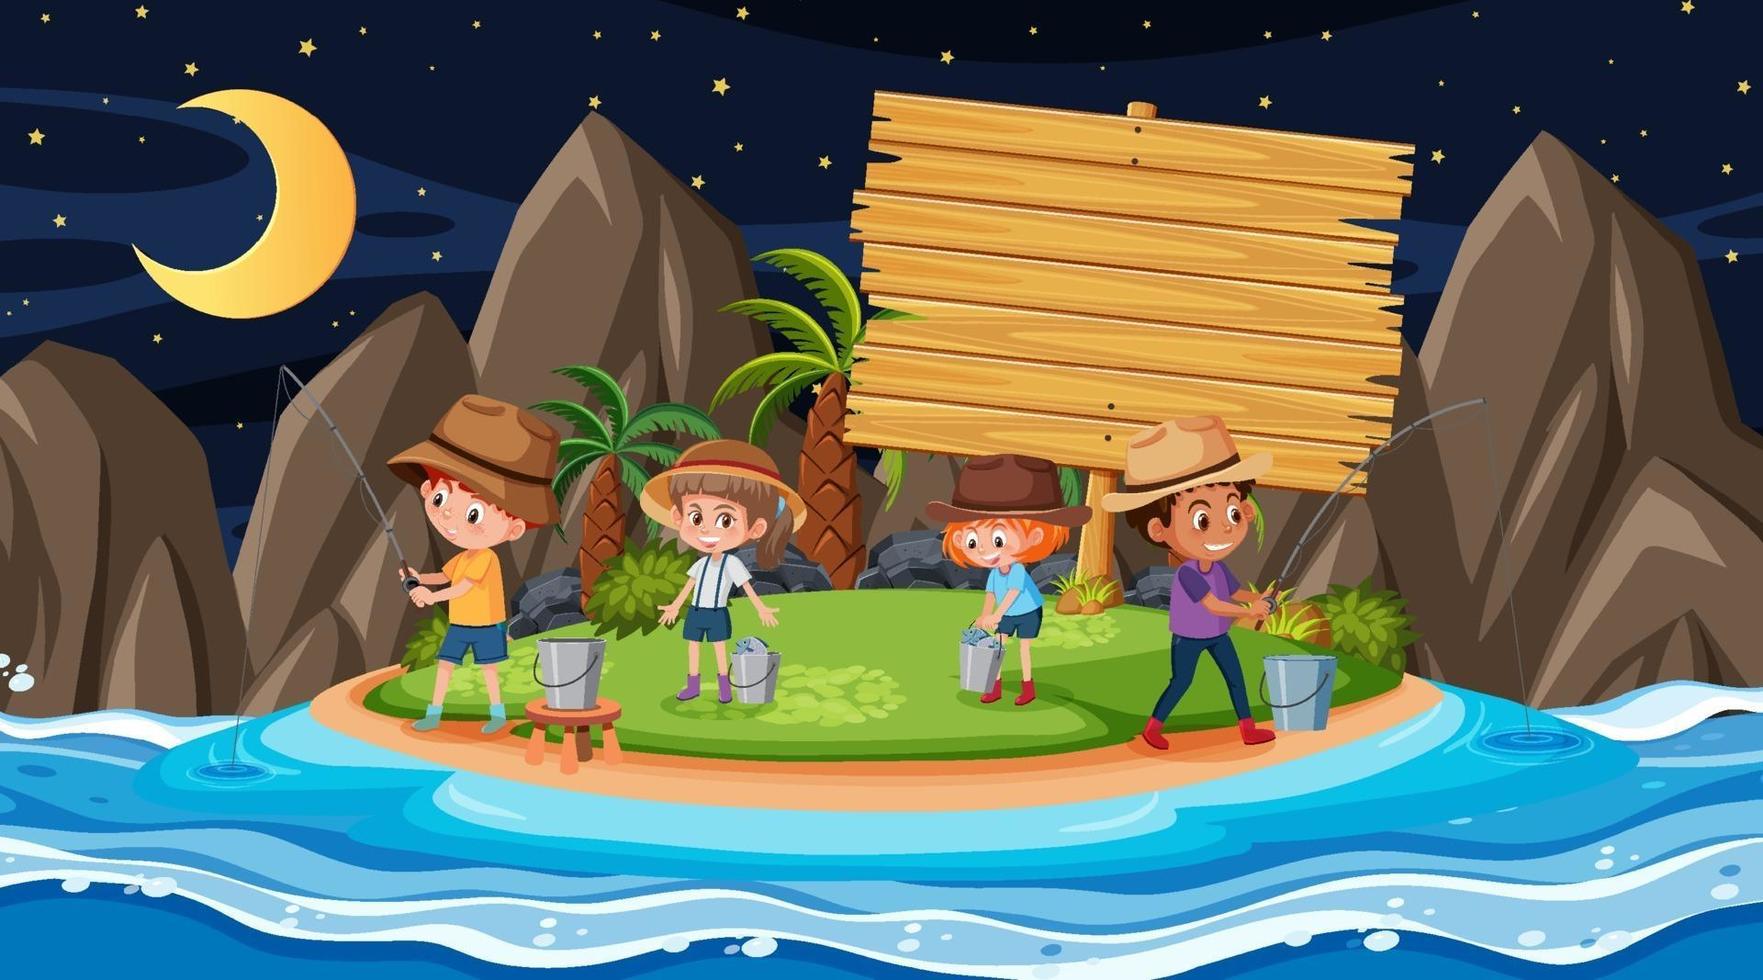 Kids on vacation at the beach night scene with an empty wooden banner vector